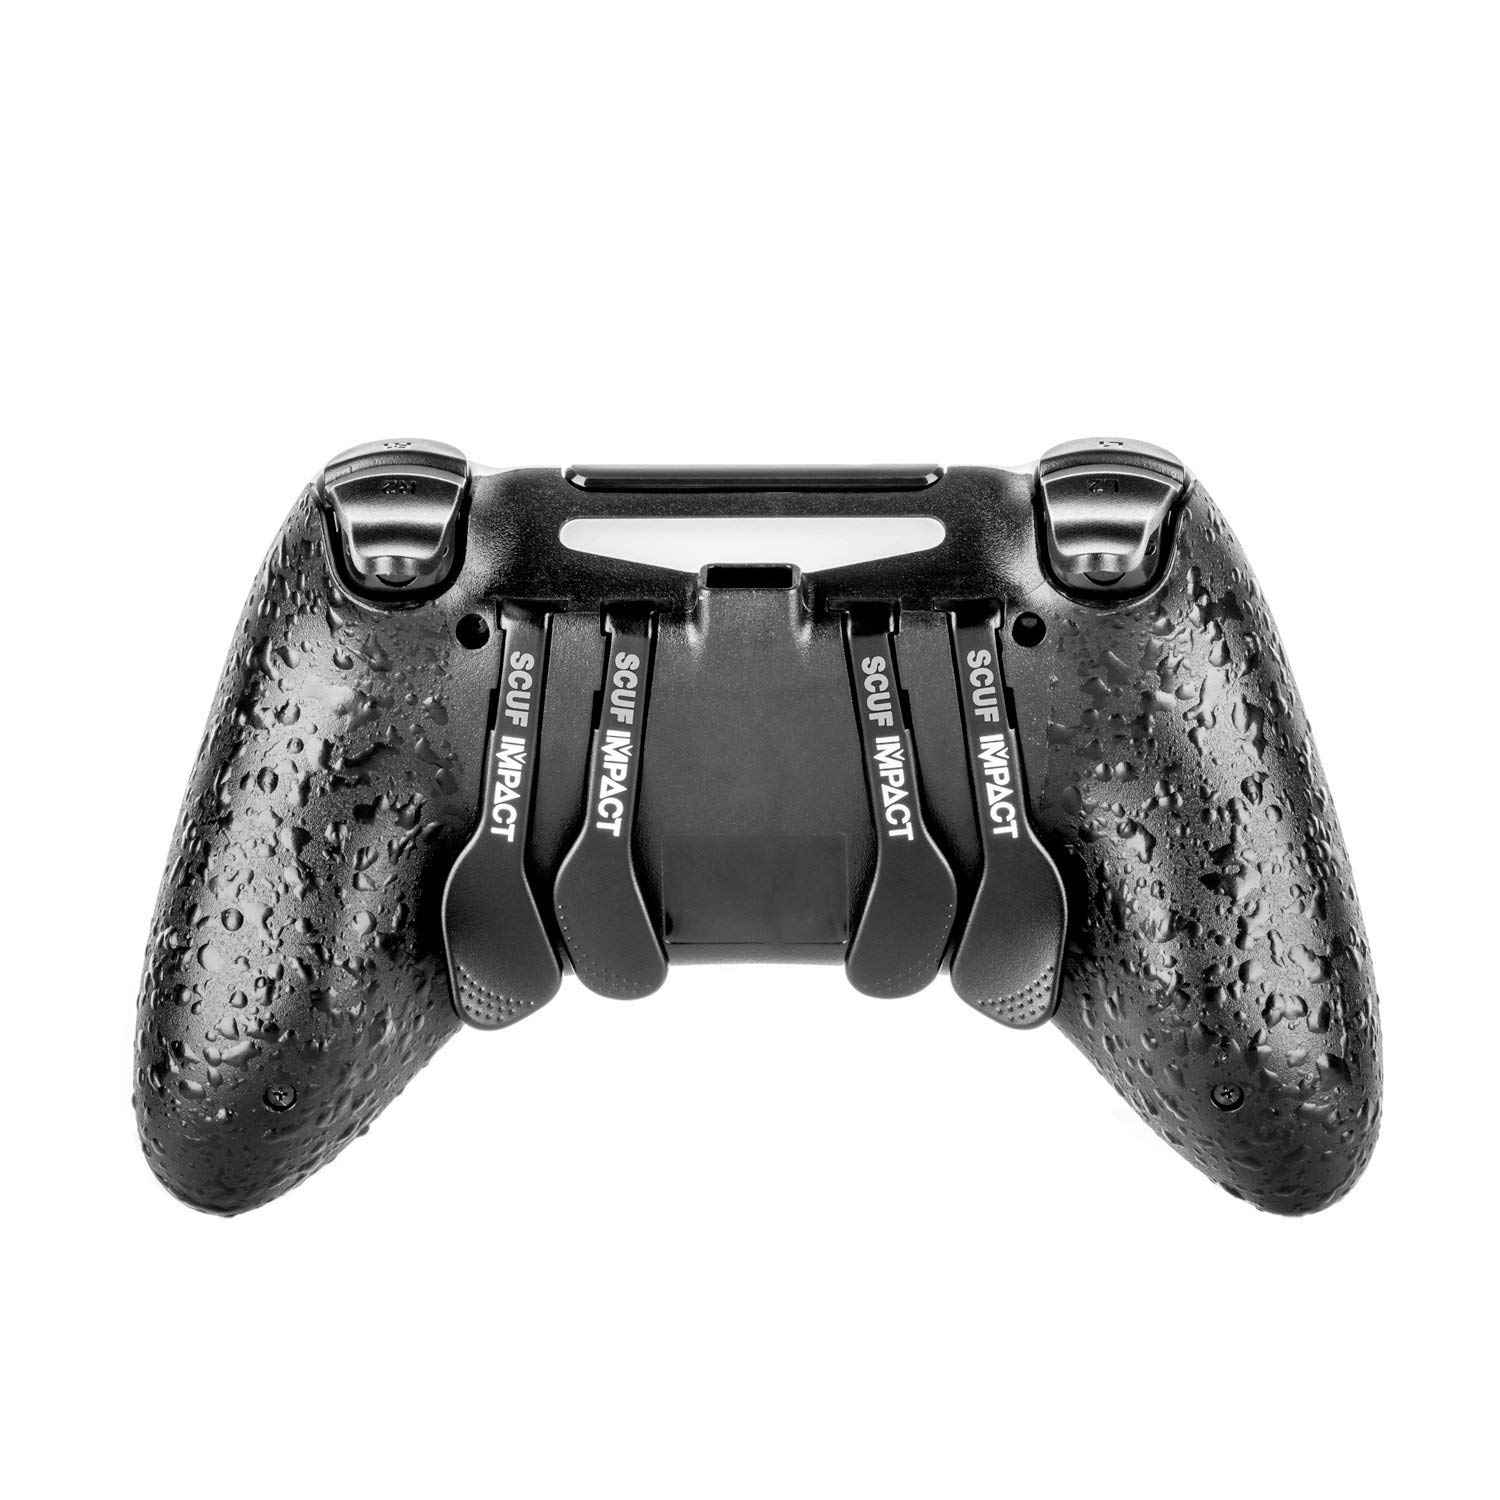 2nd hand scuf controller